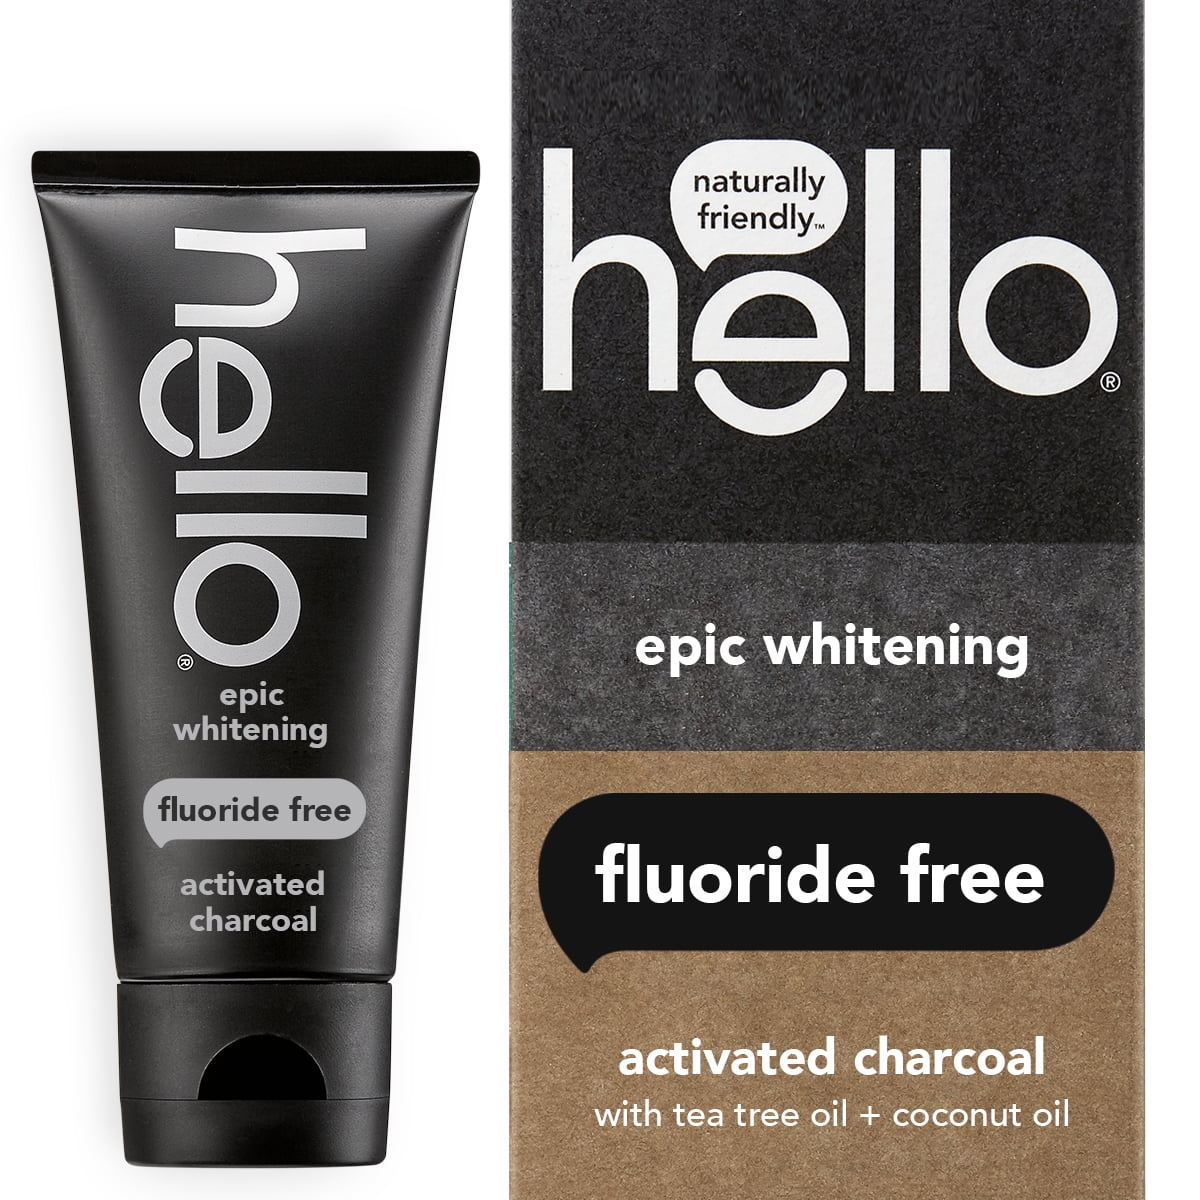 Hello Activated Charcoal Epic Whitening Fluoride Free Toothpaste, Fresh Mint + Coconut Oil, 4.0oz